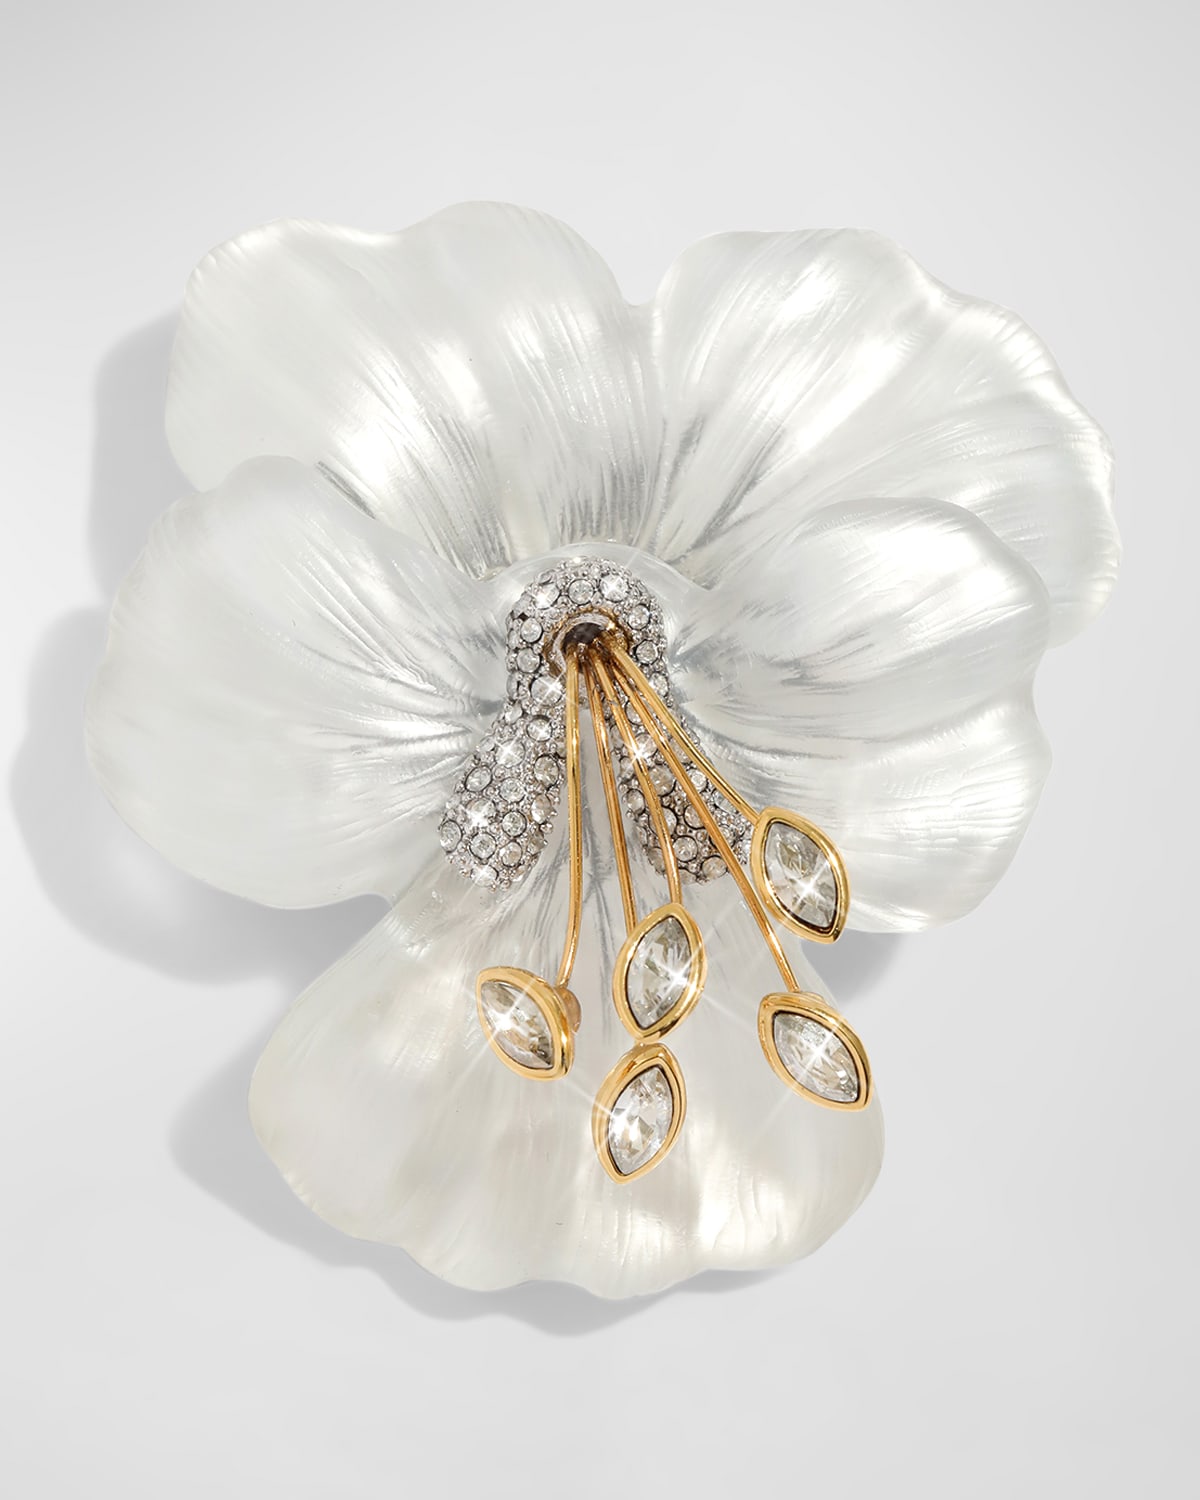 Alexis Bittar Pansy Lucite Crystal Pin In White